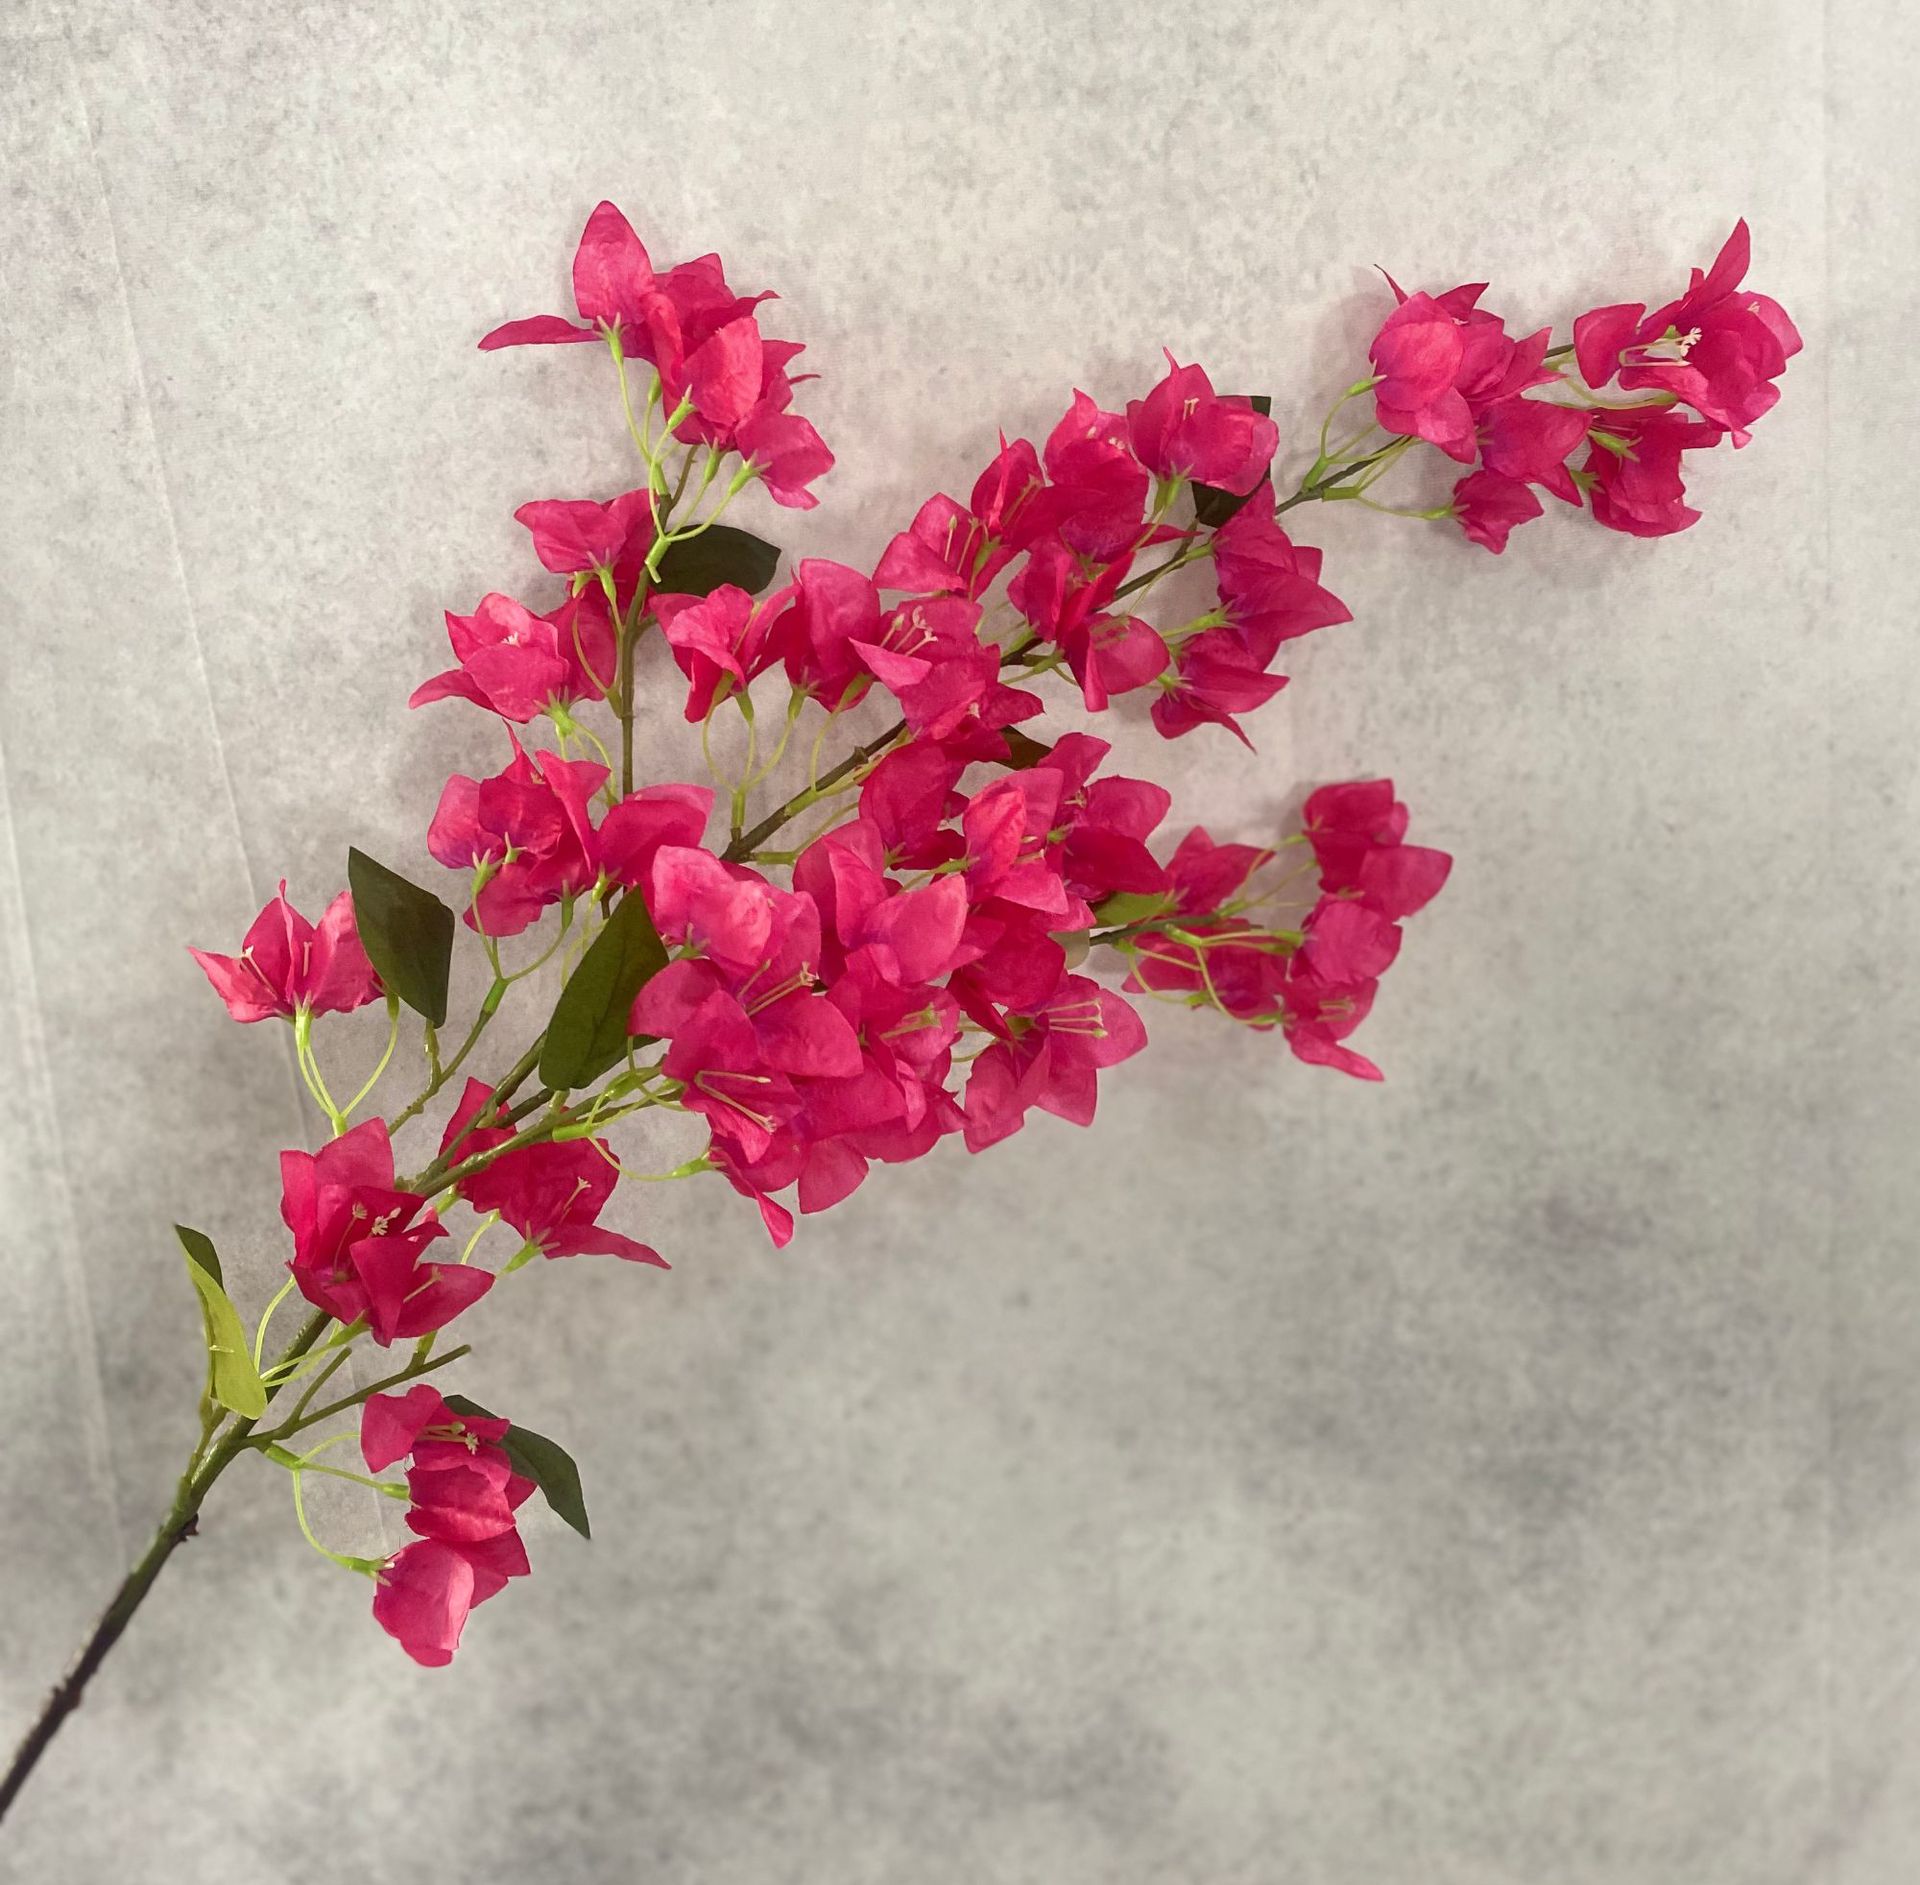 New Simulation Bougainvillea Artificial Flower Wedding Ceiling Flowers Hotel Home Decoration Fake Flower for Wedding Cross-Border